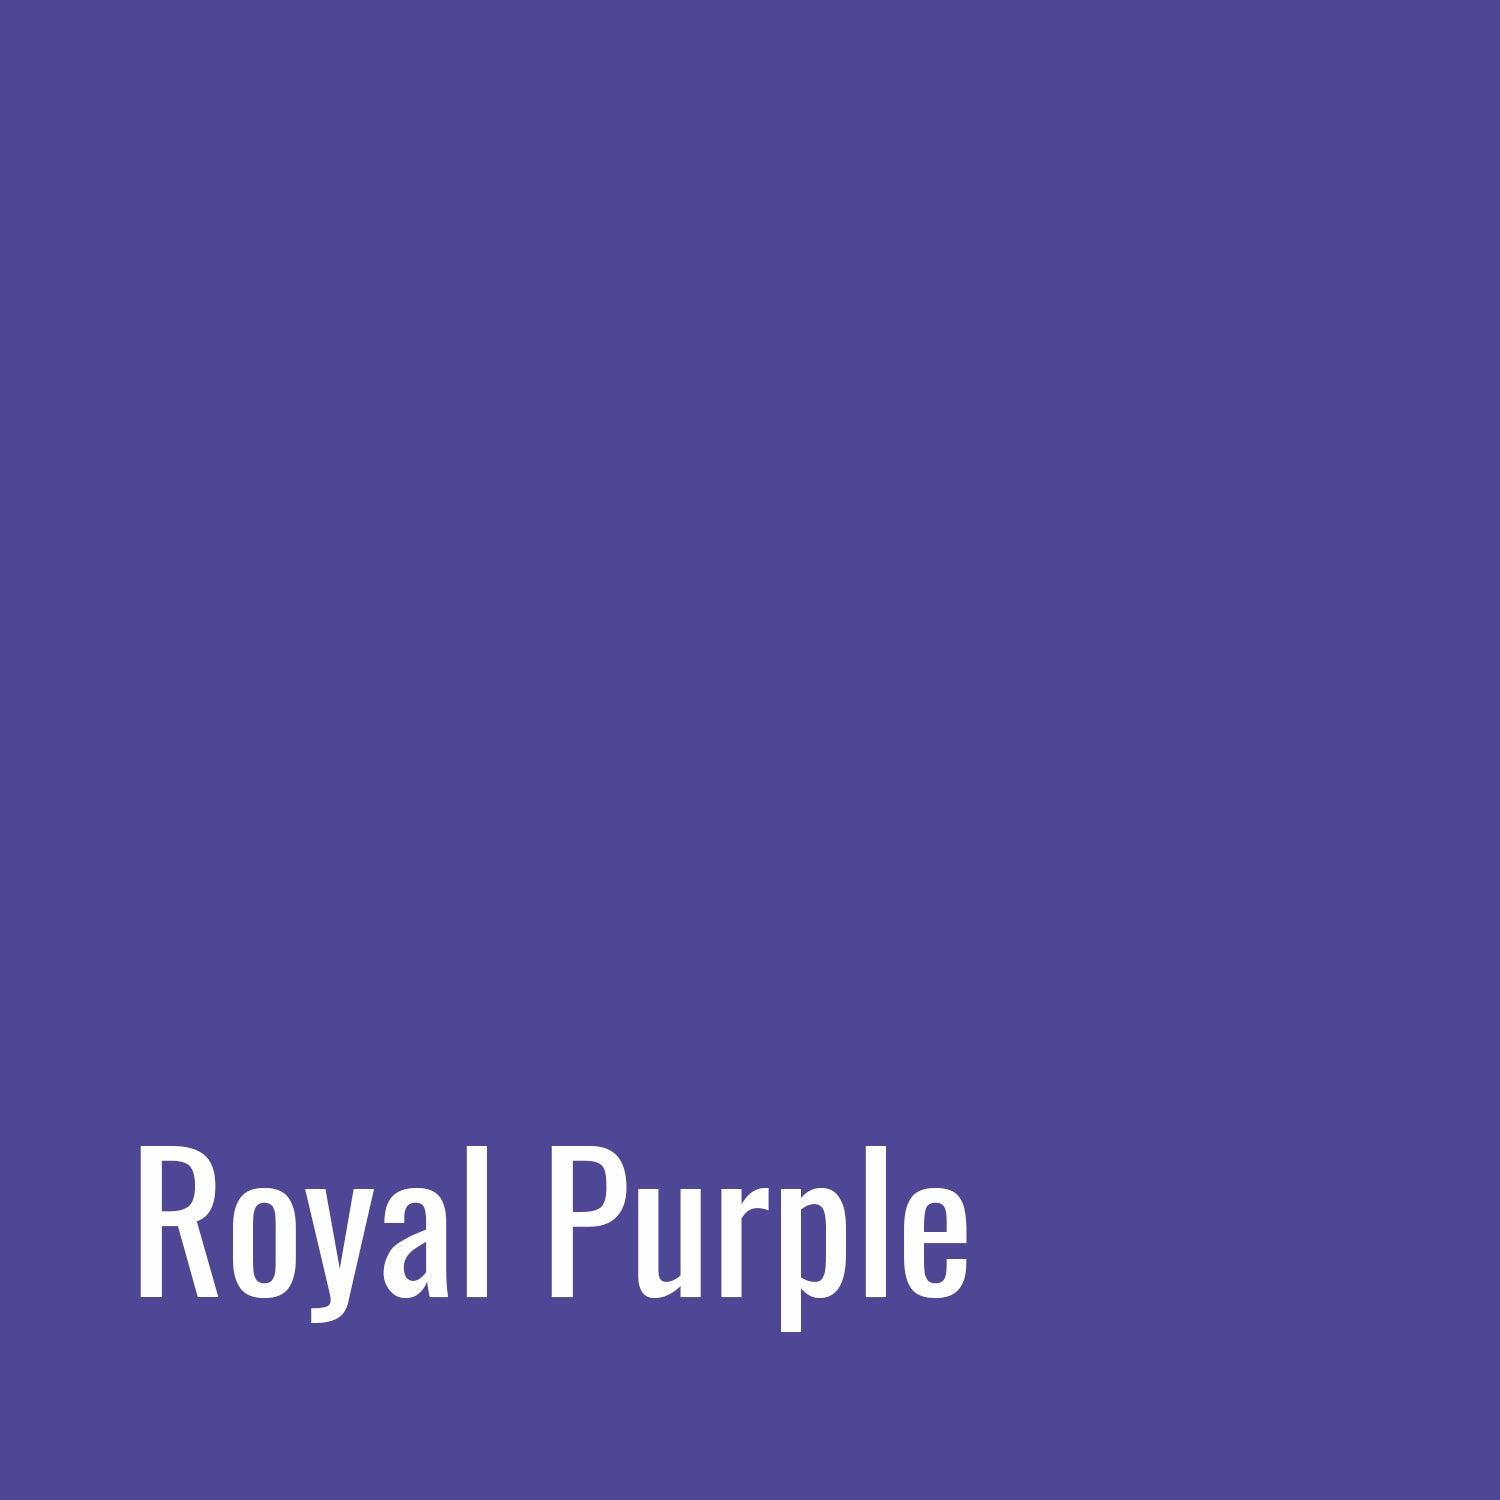 Siser Easyweed Stretch HTV Royal Purple OVERSTOCK SALE